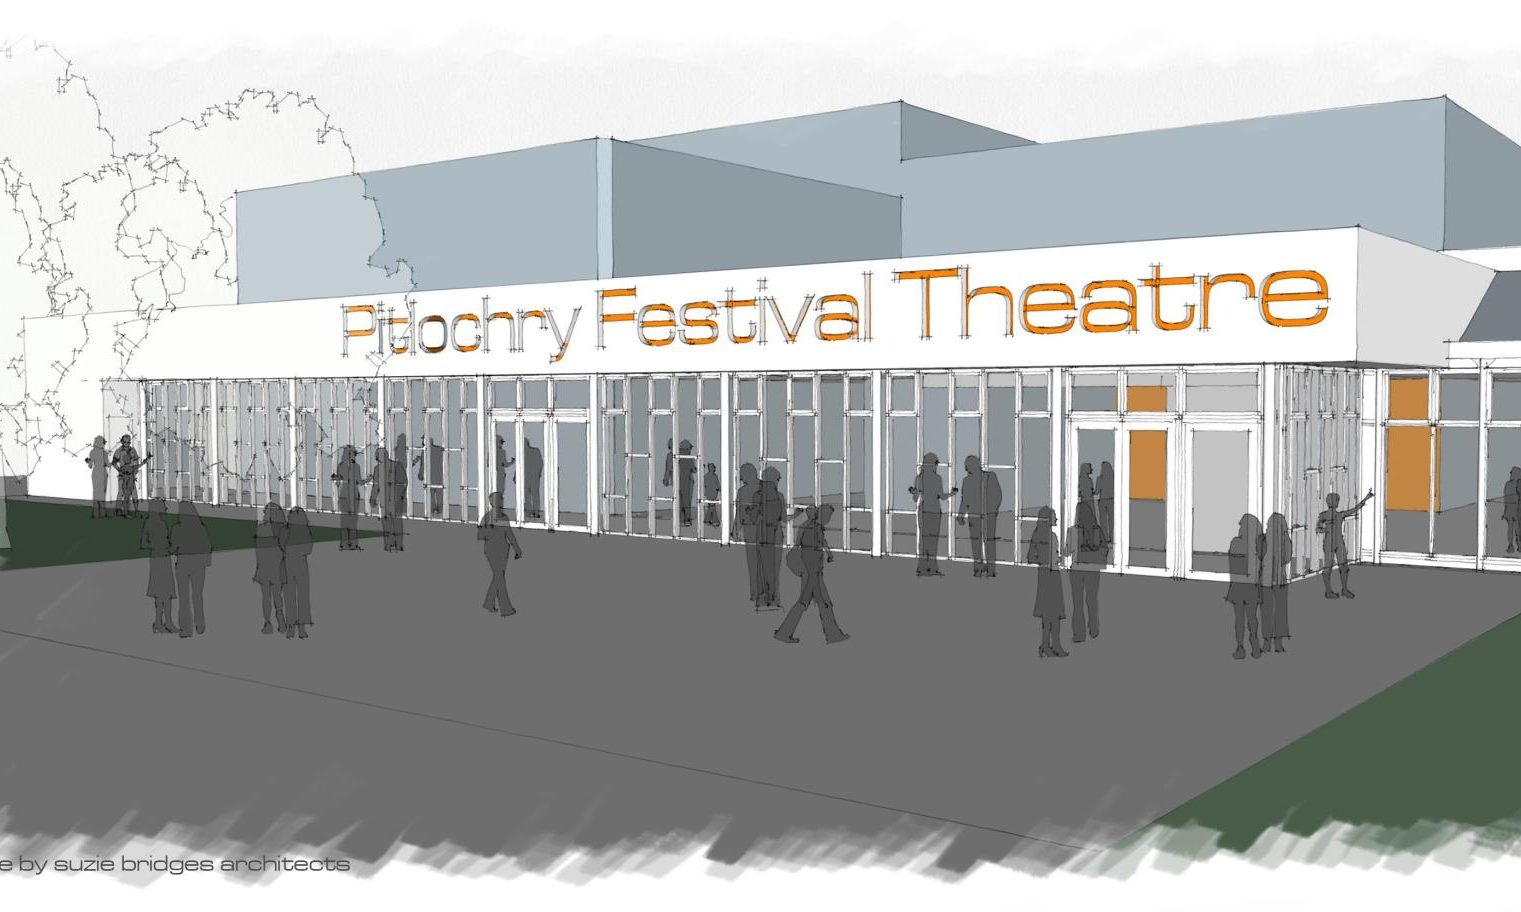 Extension plans lodged at Pitlochry Festival Theatre